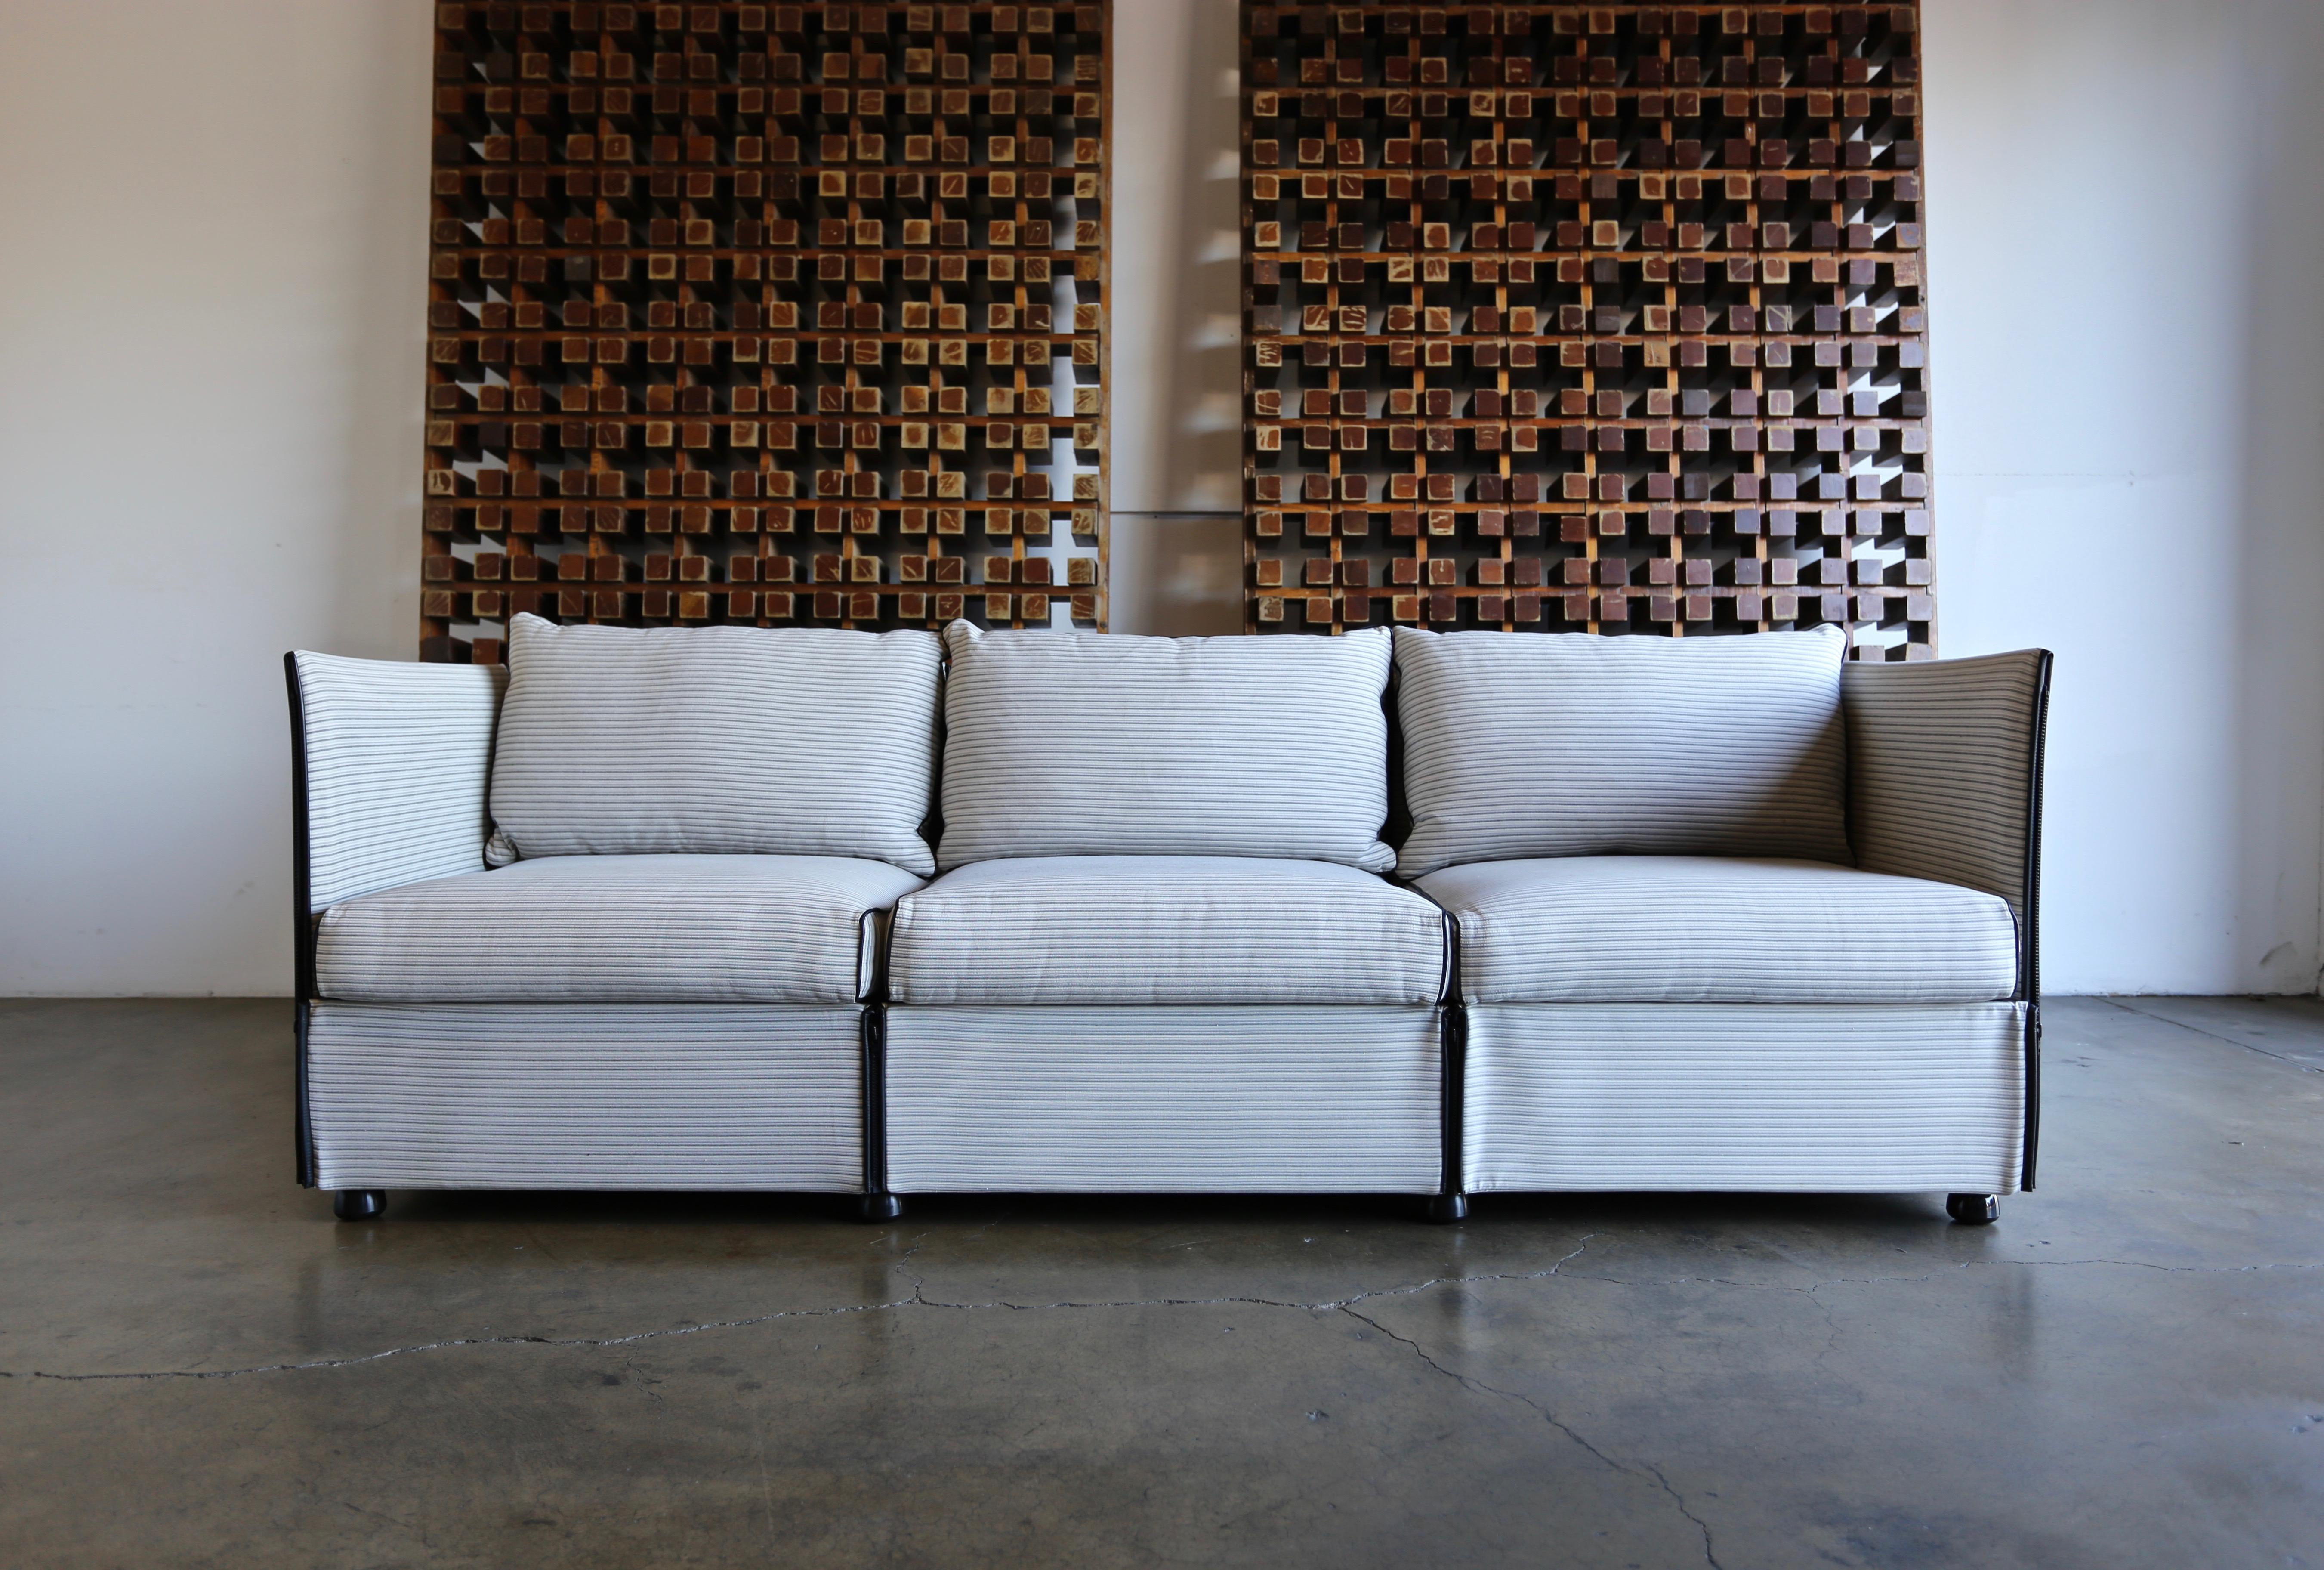 Char-a-Banc sofa by Mario Bellini for Cassina.